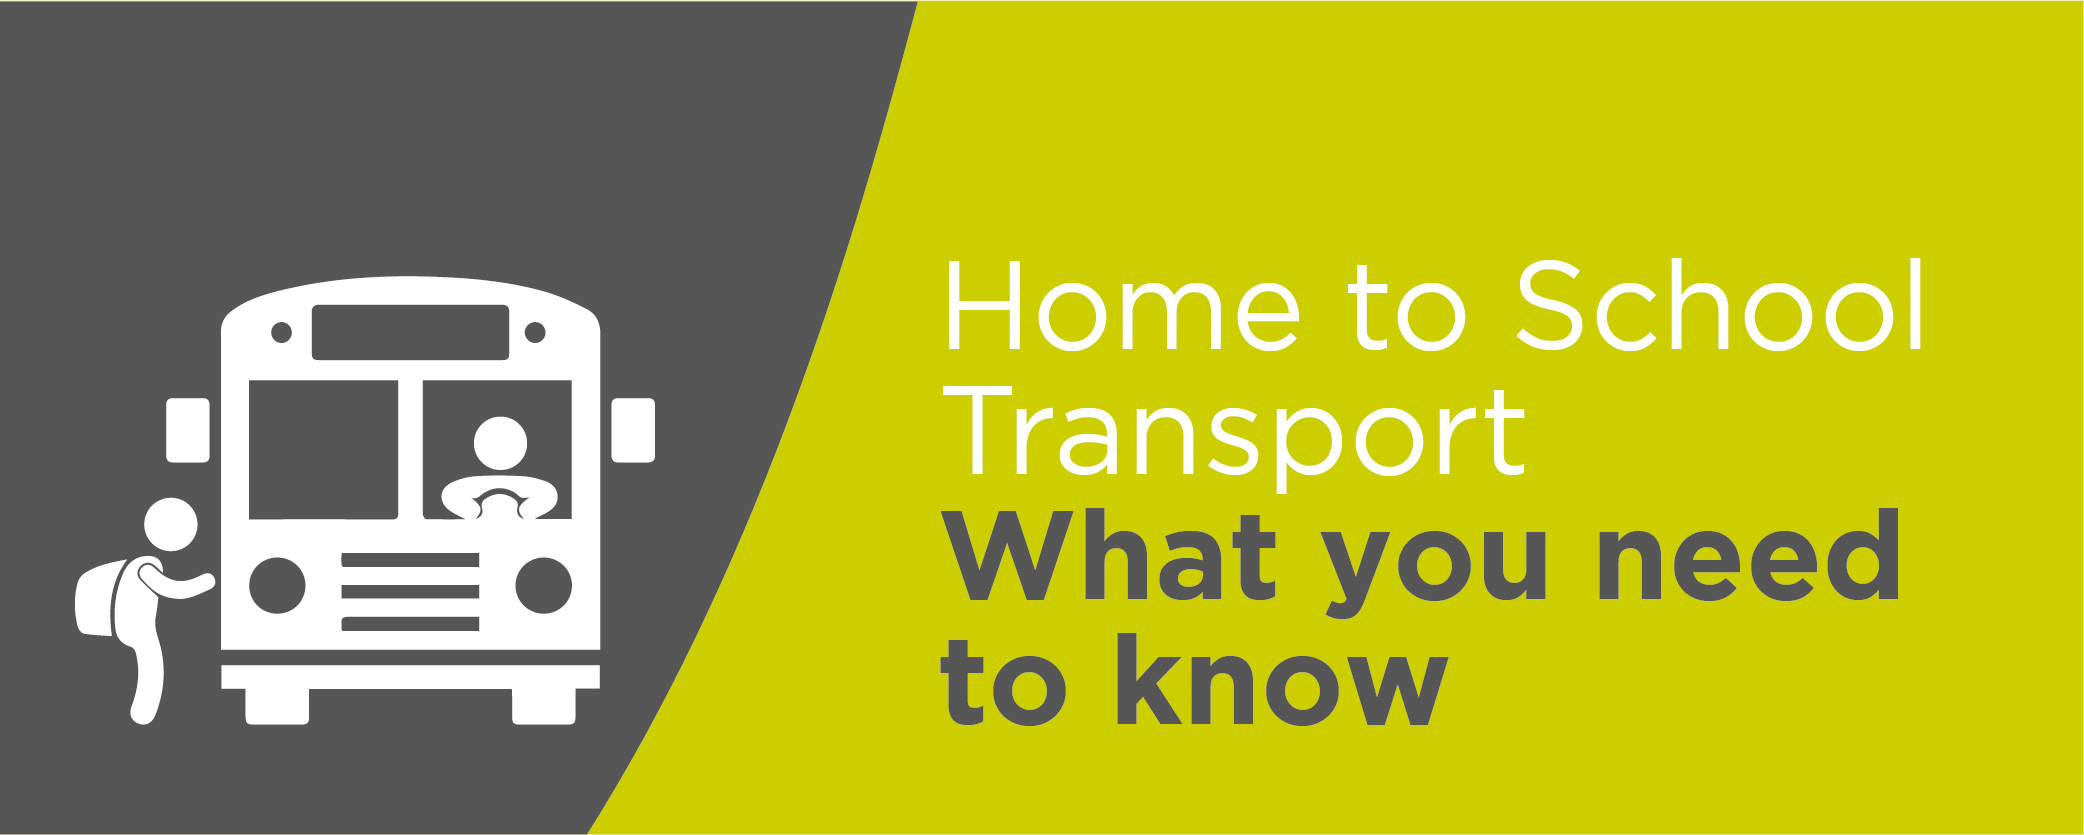 Home to School Transport - what you need to know